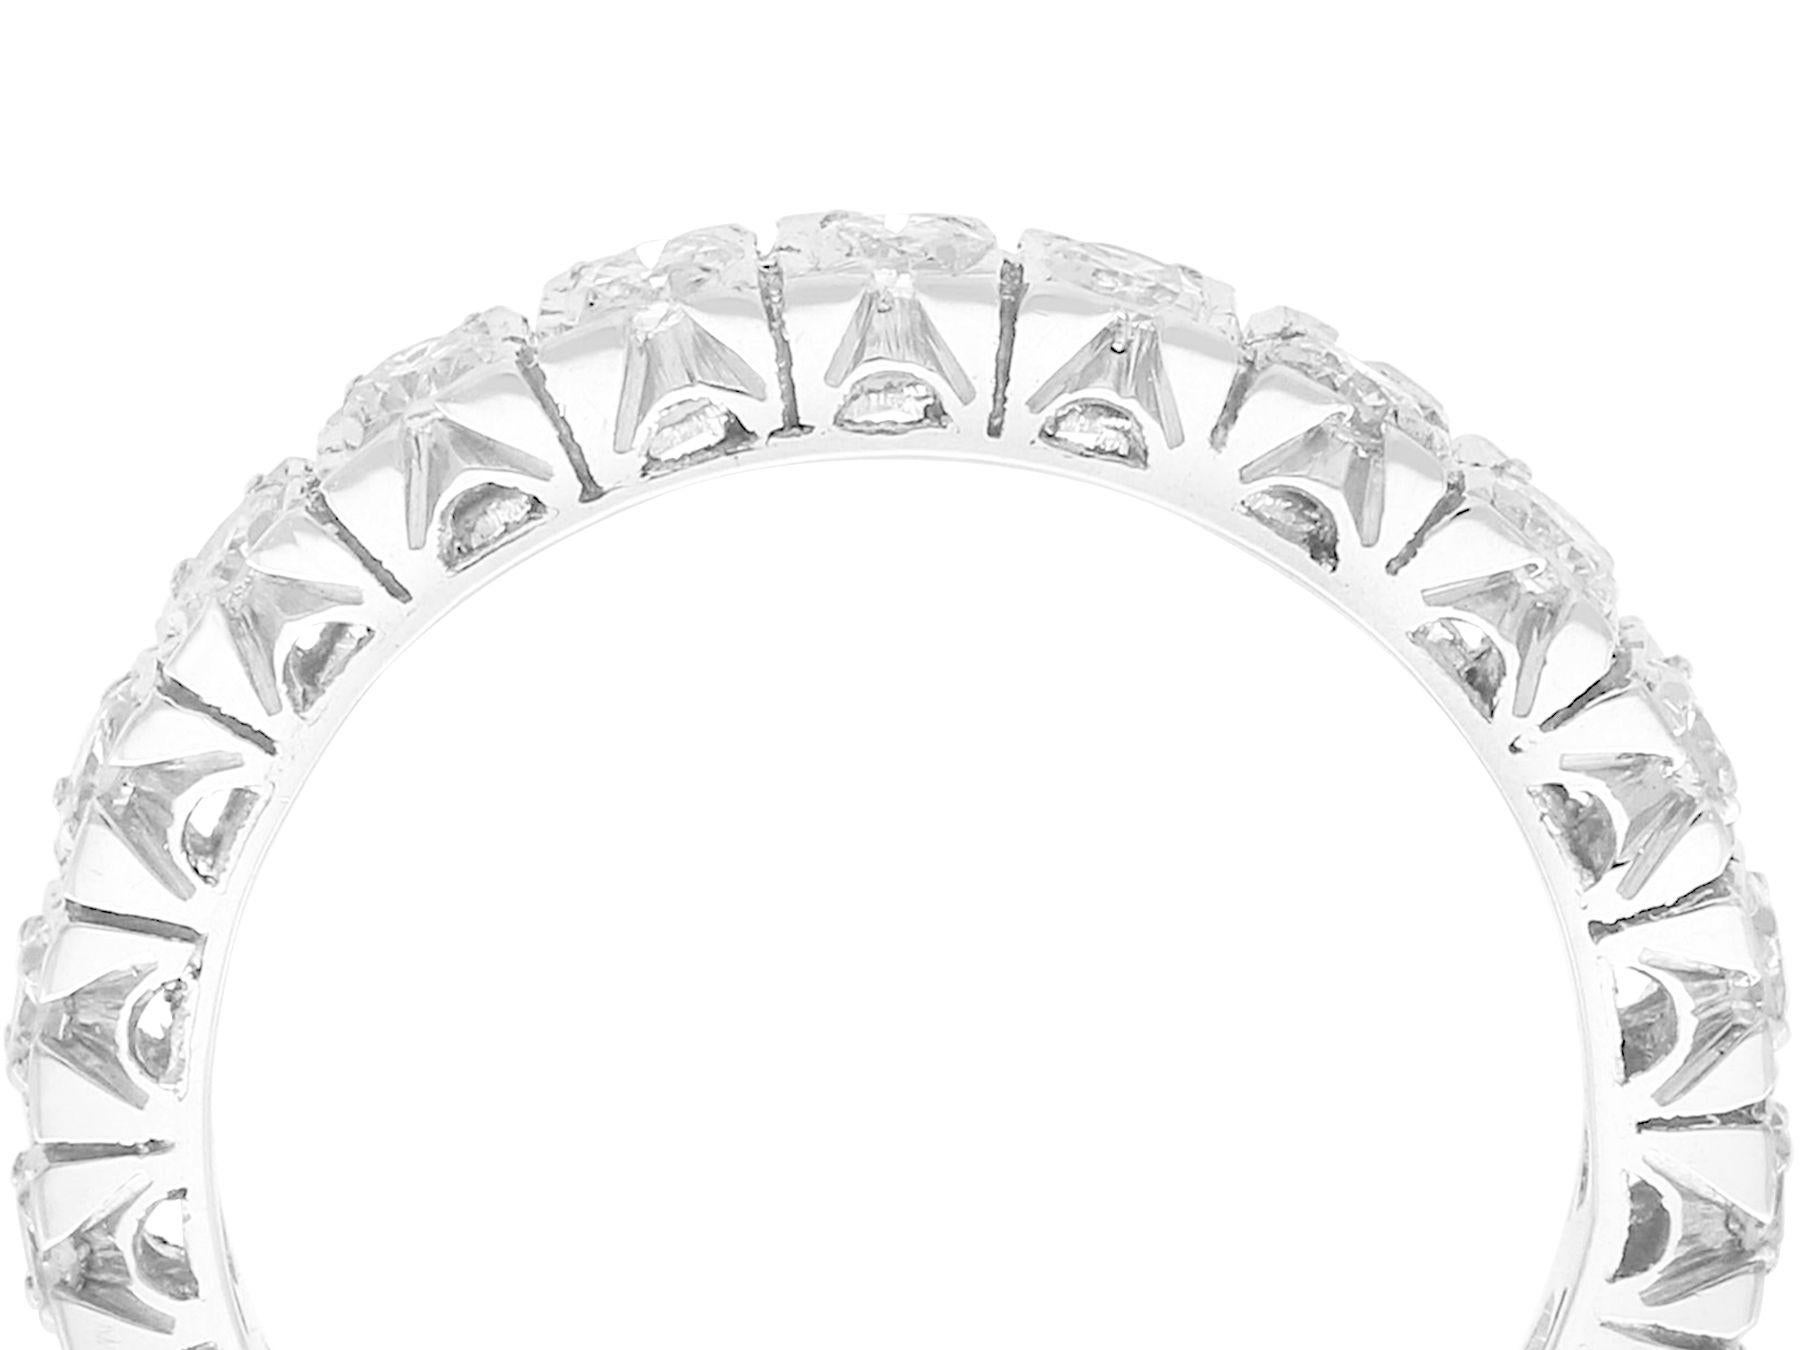 A fine and impressive vintage 1.20 carat diamond platinum and palladium full eternity ring; part of our diverse diamond jewelry and estate jewelry collections.

This fine and impressive vintage diamond eternity ring has been crafted in platinum and